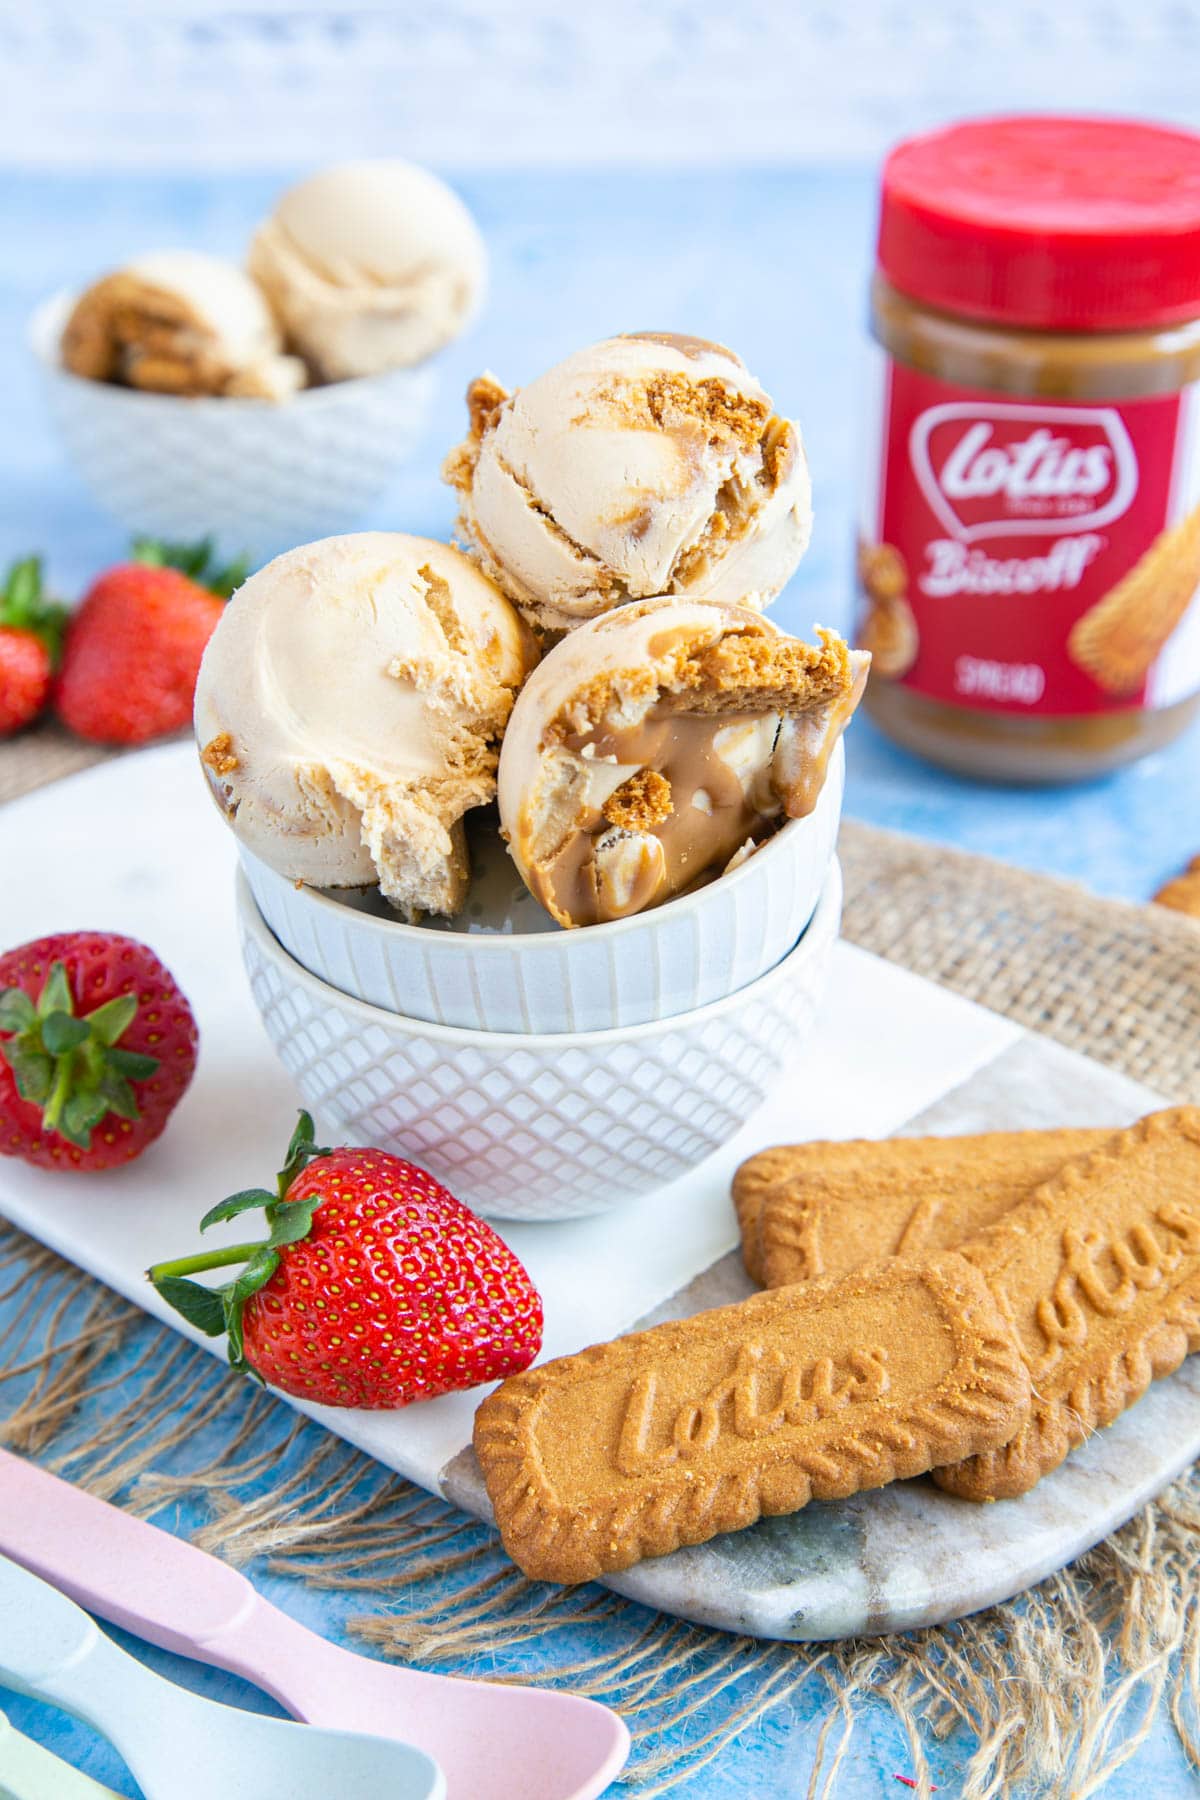 Three scoops of speculoos ice cream in a small white bowl. A jar of Lotus biscoff speculoos spread in the background.